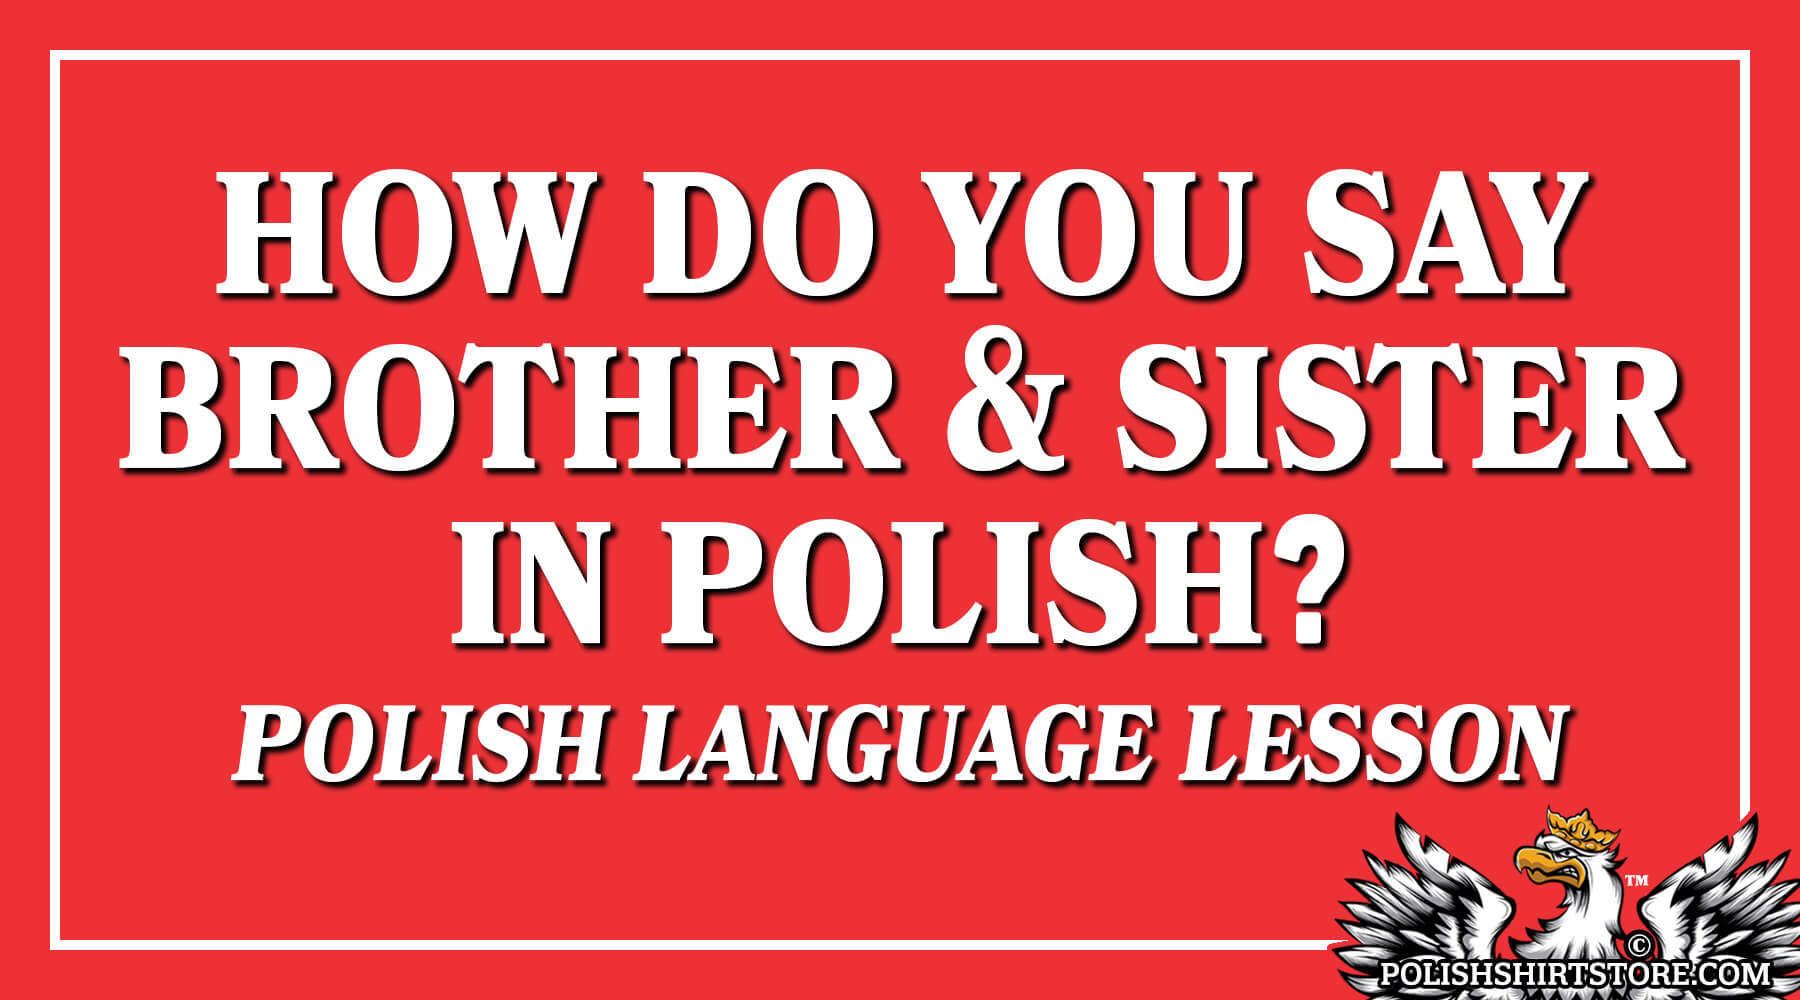 How Do You Say Brother and Sister in Polish